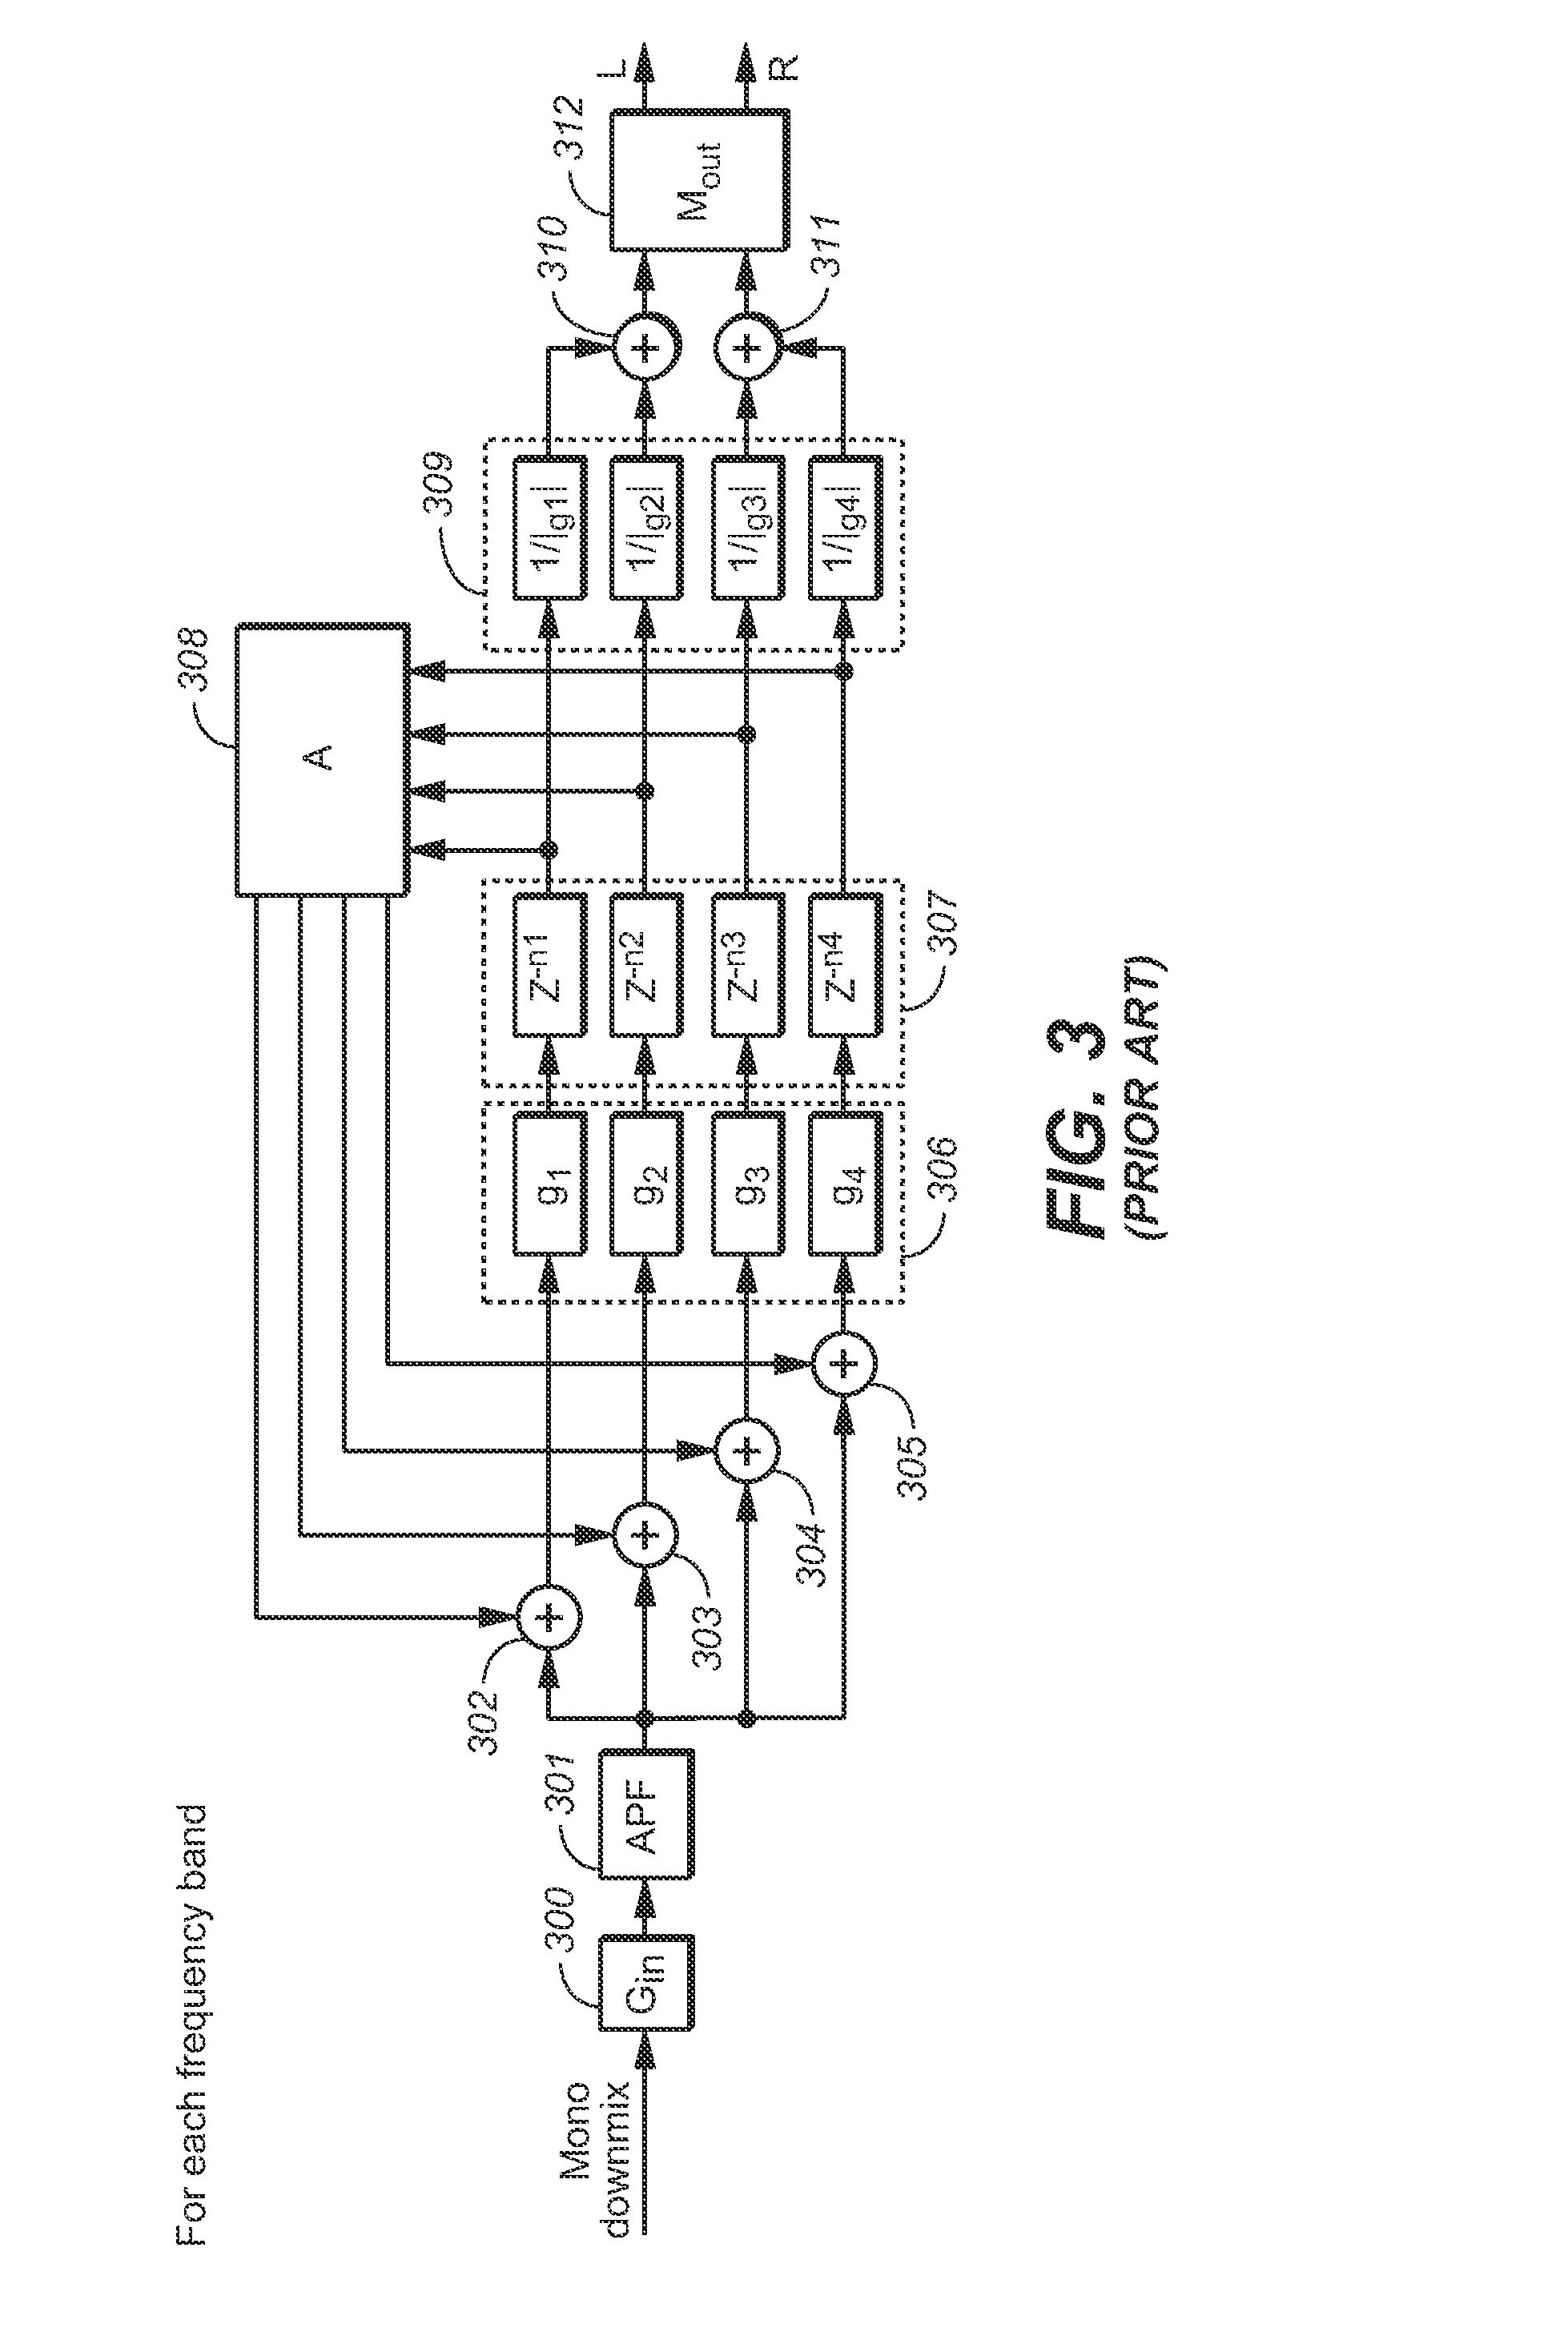 Methods and systems for designing and applying numerically optimized binaural room impulse responses